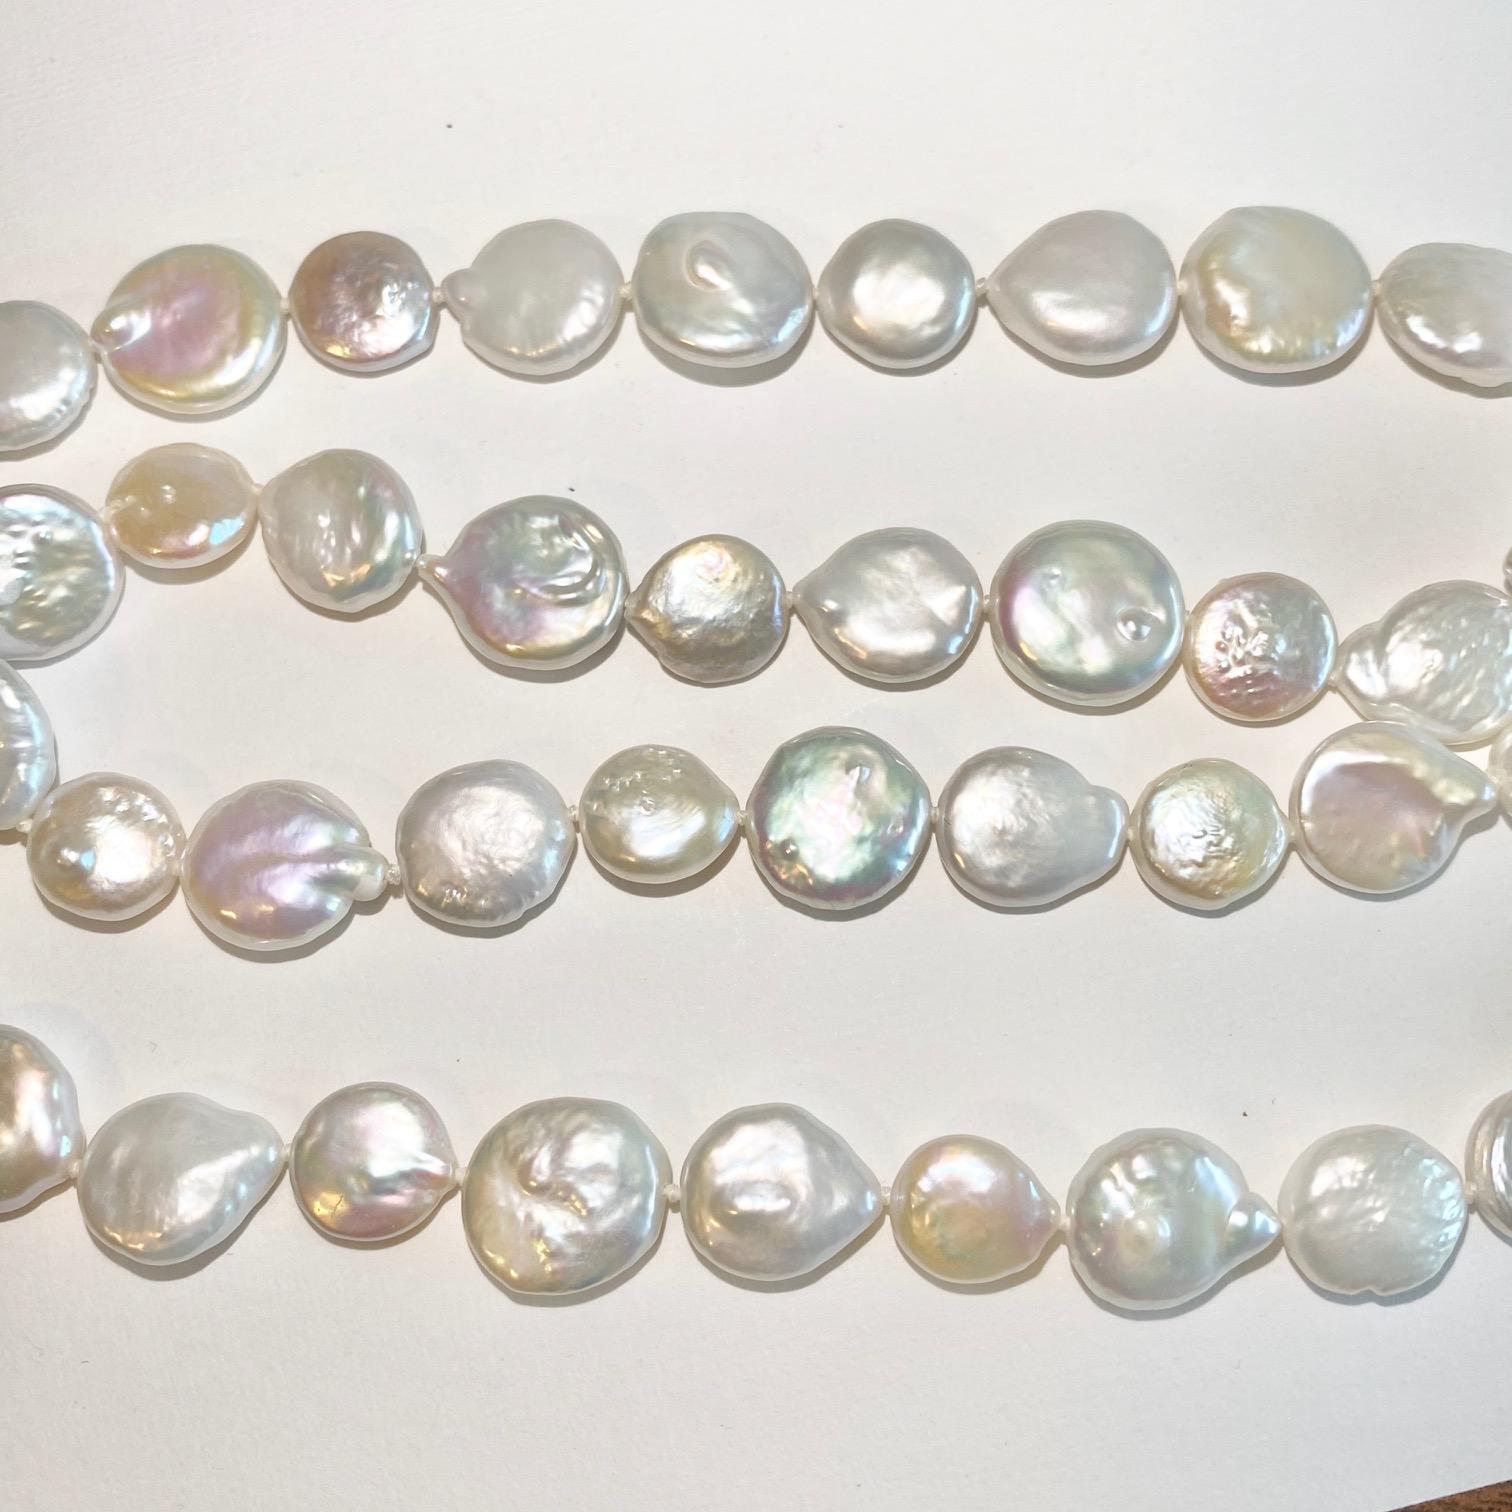 genuine pearl necklace